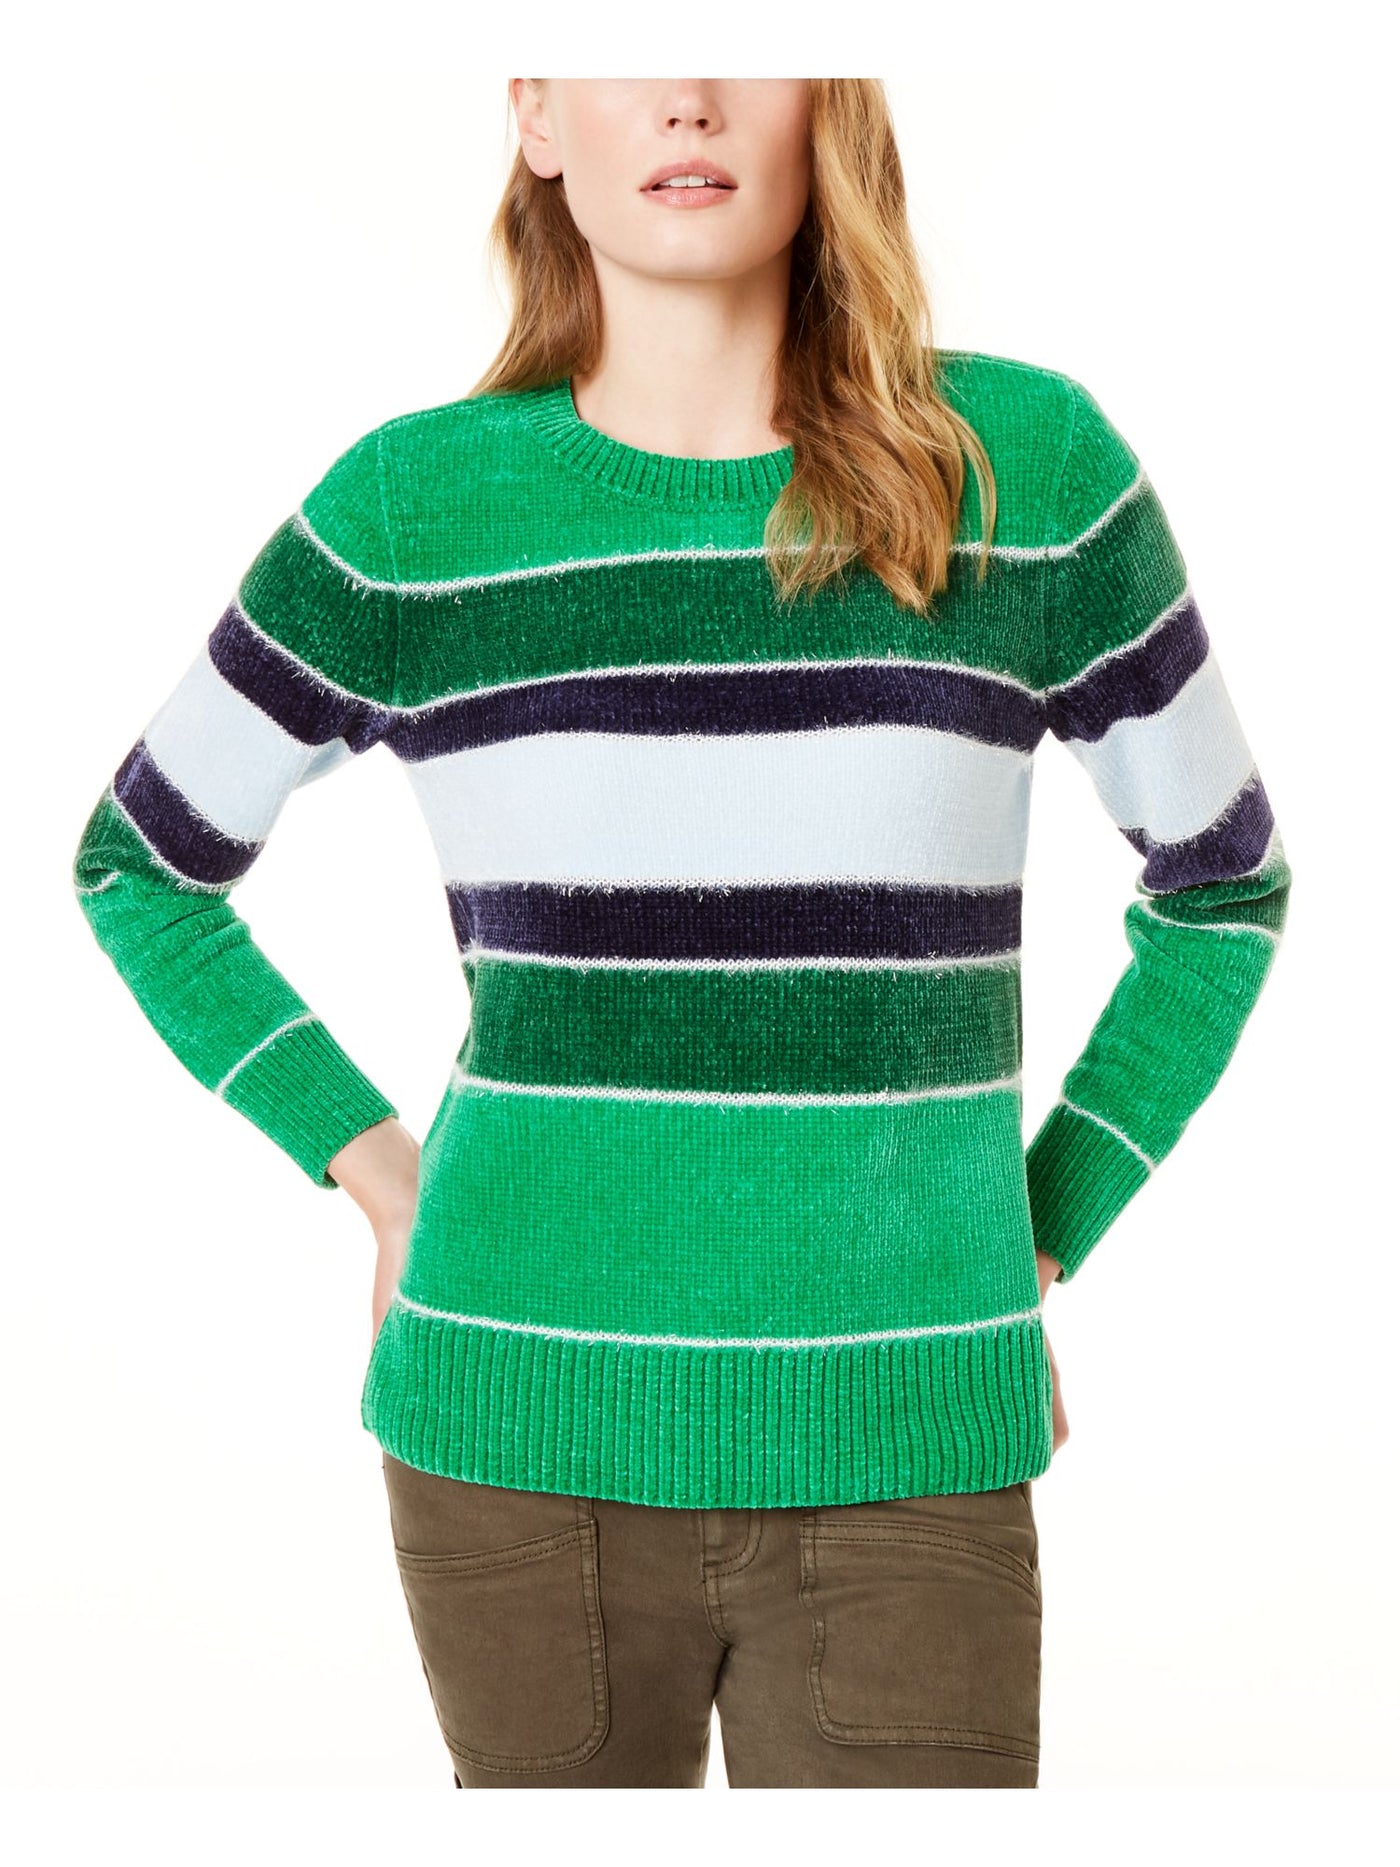 MAISON JULES Womens Green Frayed Color Block Long Sleeve Crew Neck Sweater XS